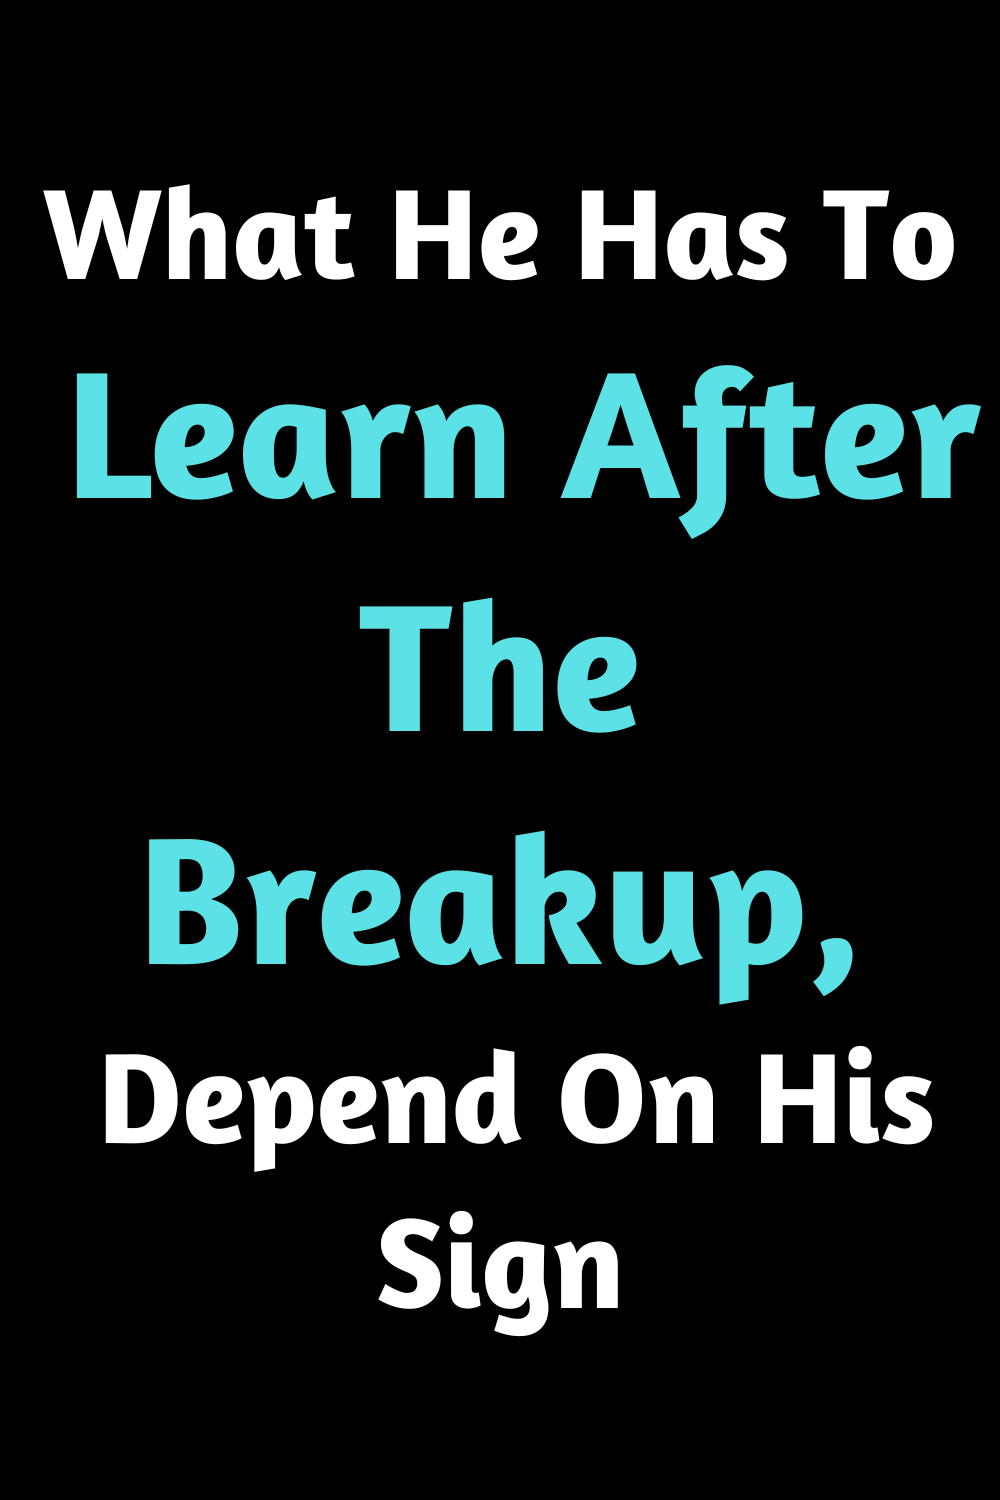 What He Has To Learn After The Breakup, Depend On His Sign